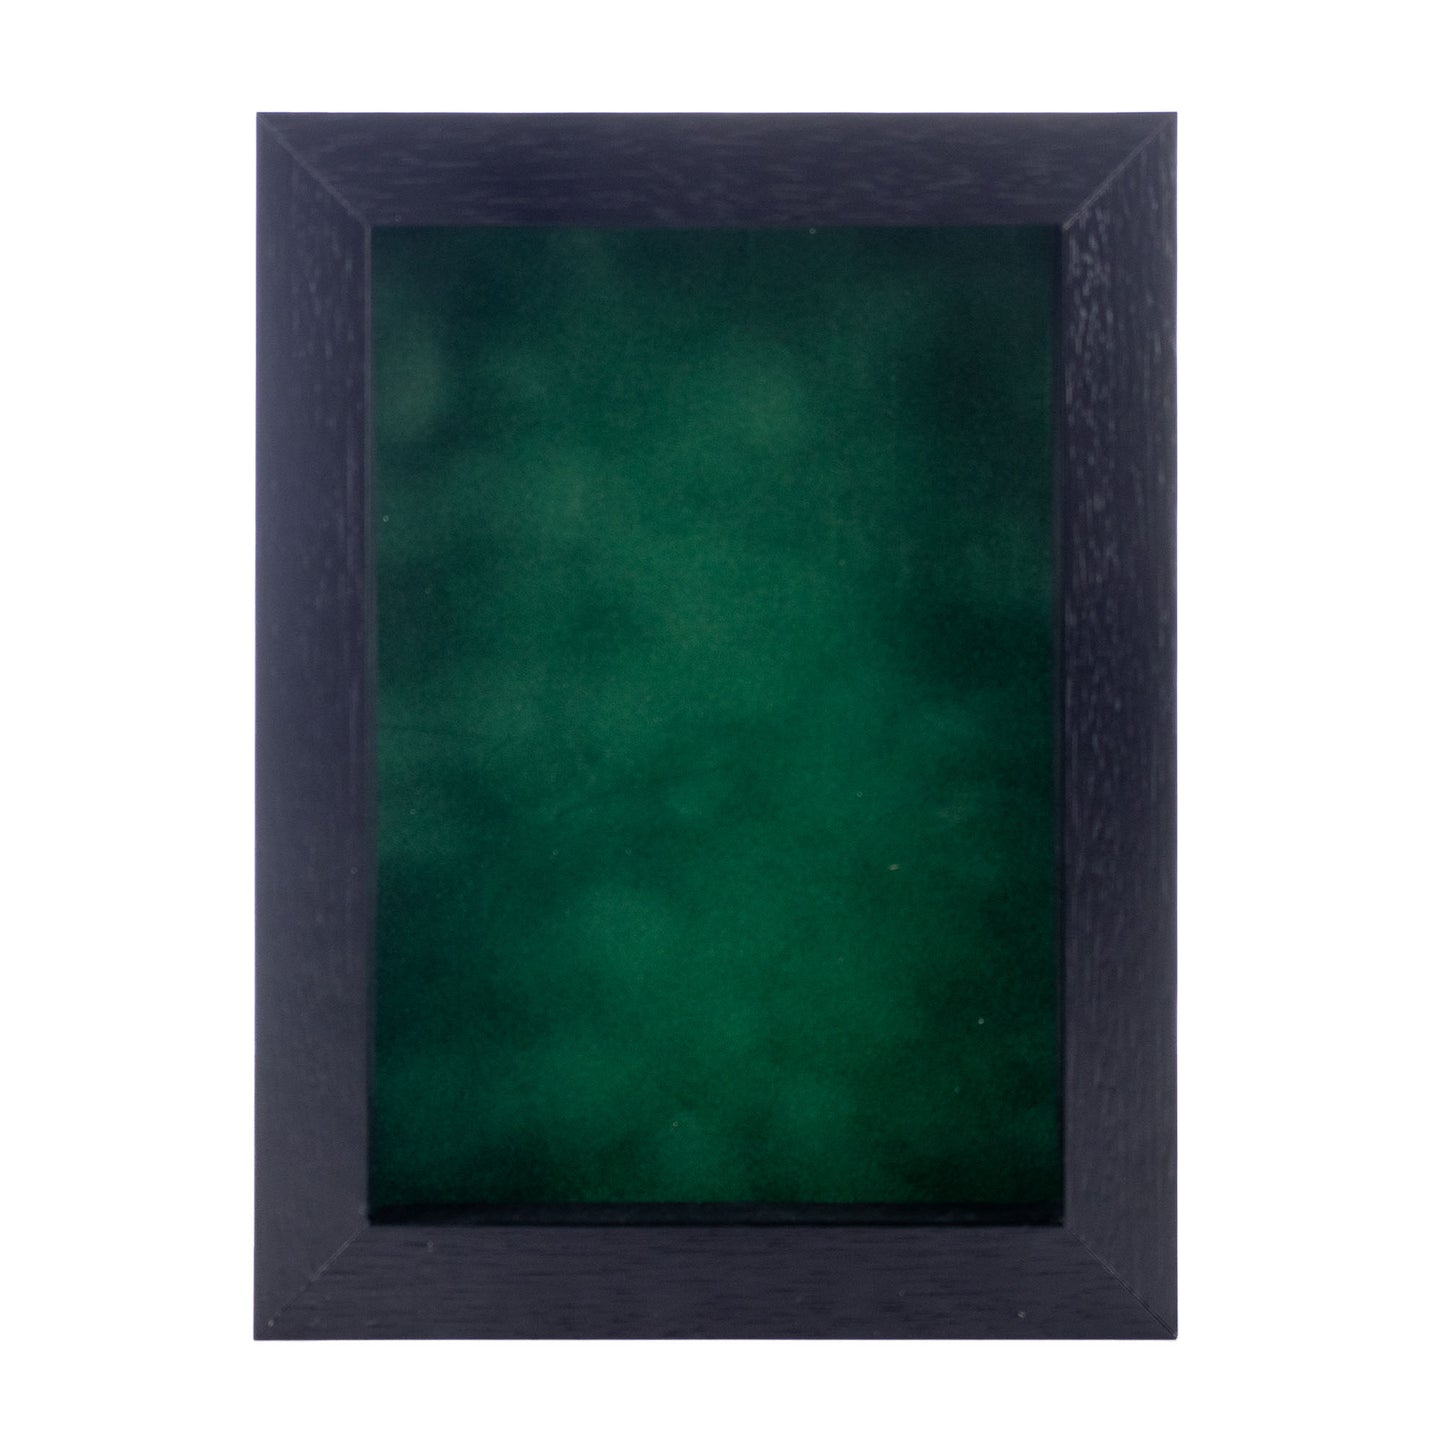 Textured Black Shadow Box Frame With Forest Green Acid-Free Suede Backing